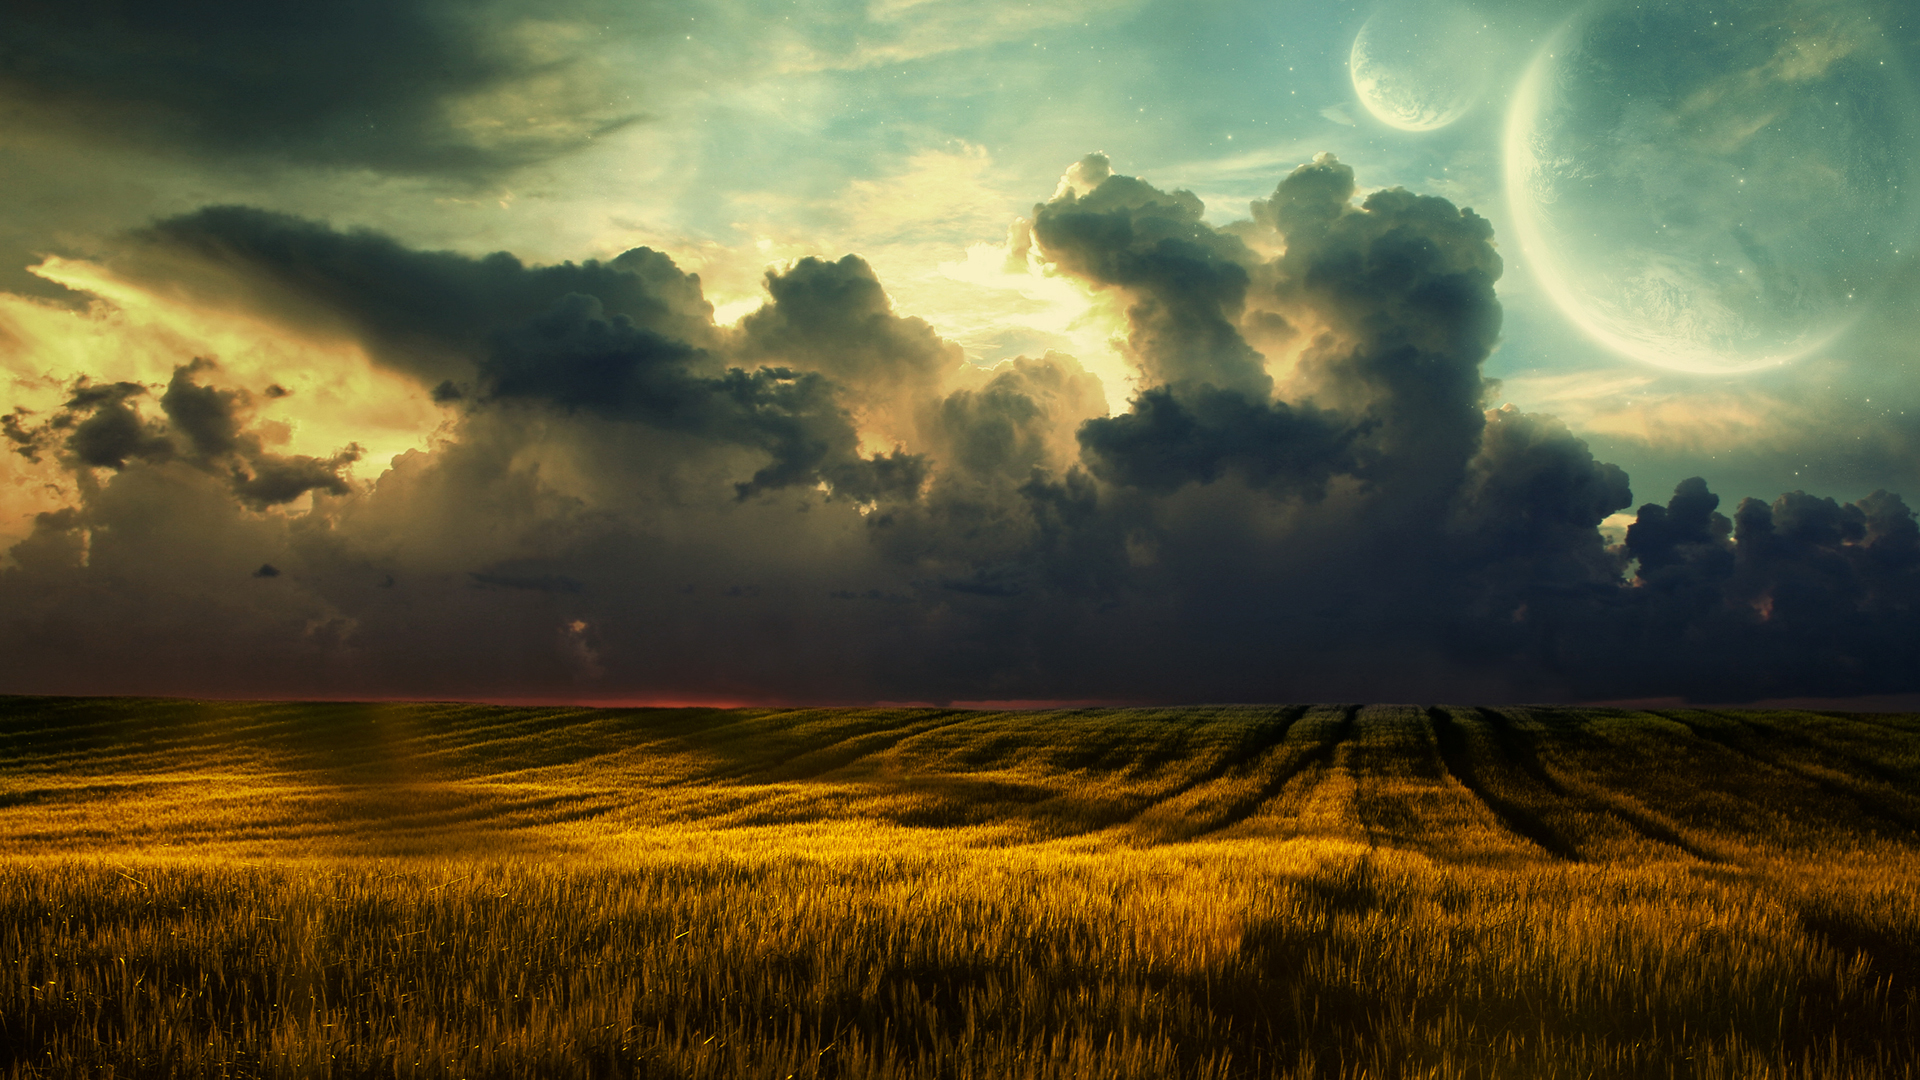 Fantasy Landscape With Giant Moons HD Wallpaper 1920x1080 ID56213